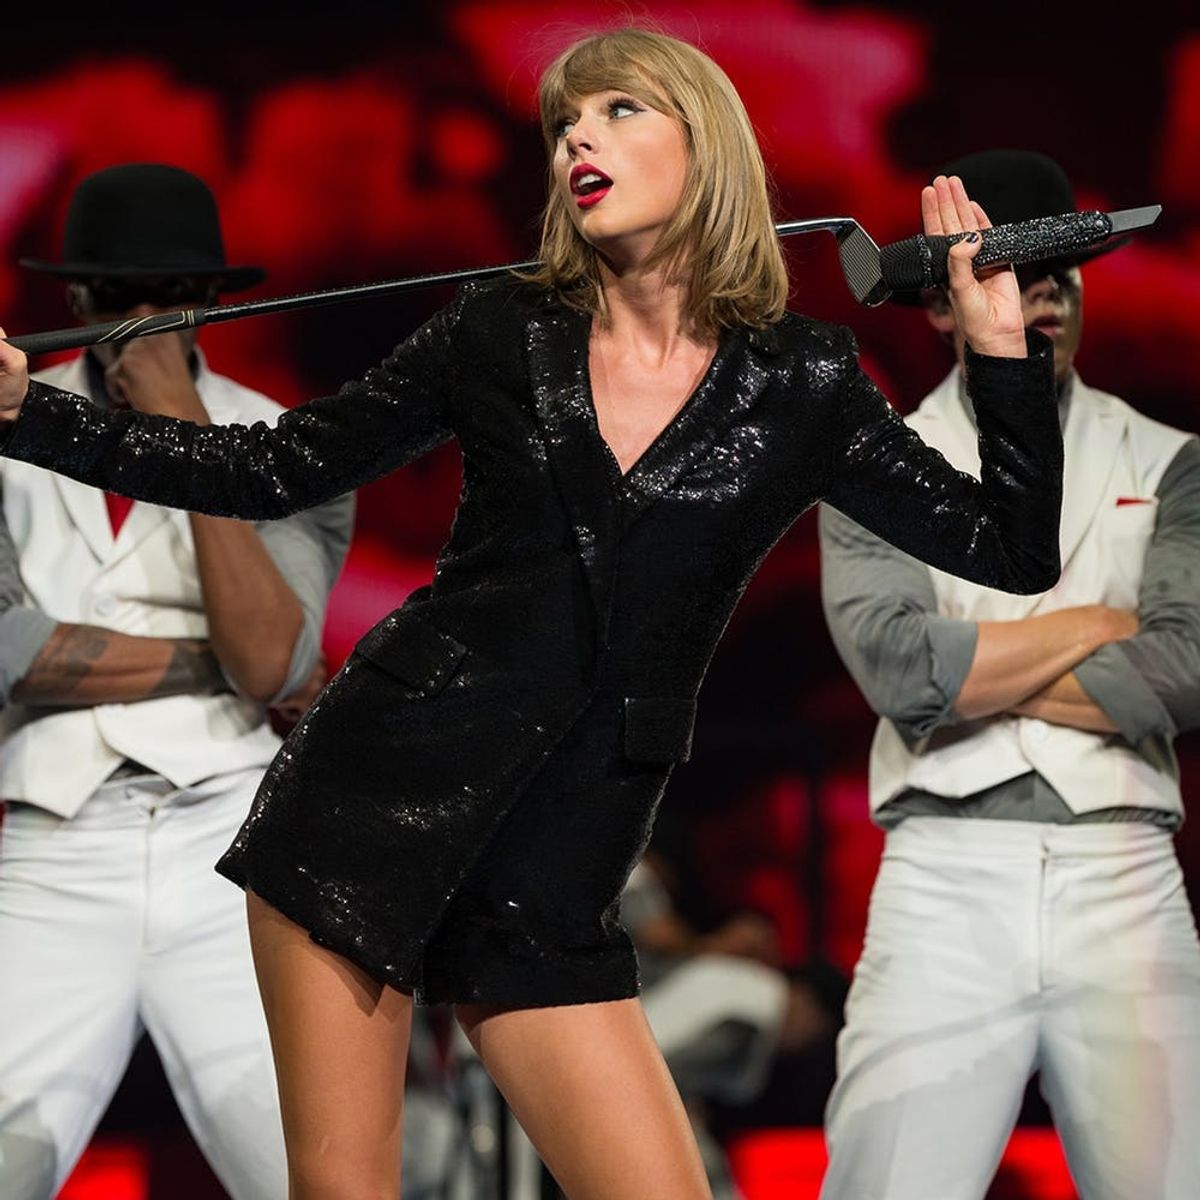 Here Is the OTHER Great Taylor Swift Moment That Happened Last Night